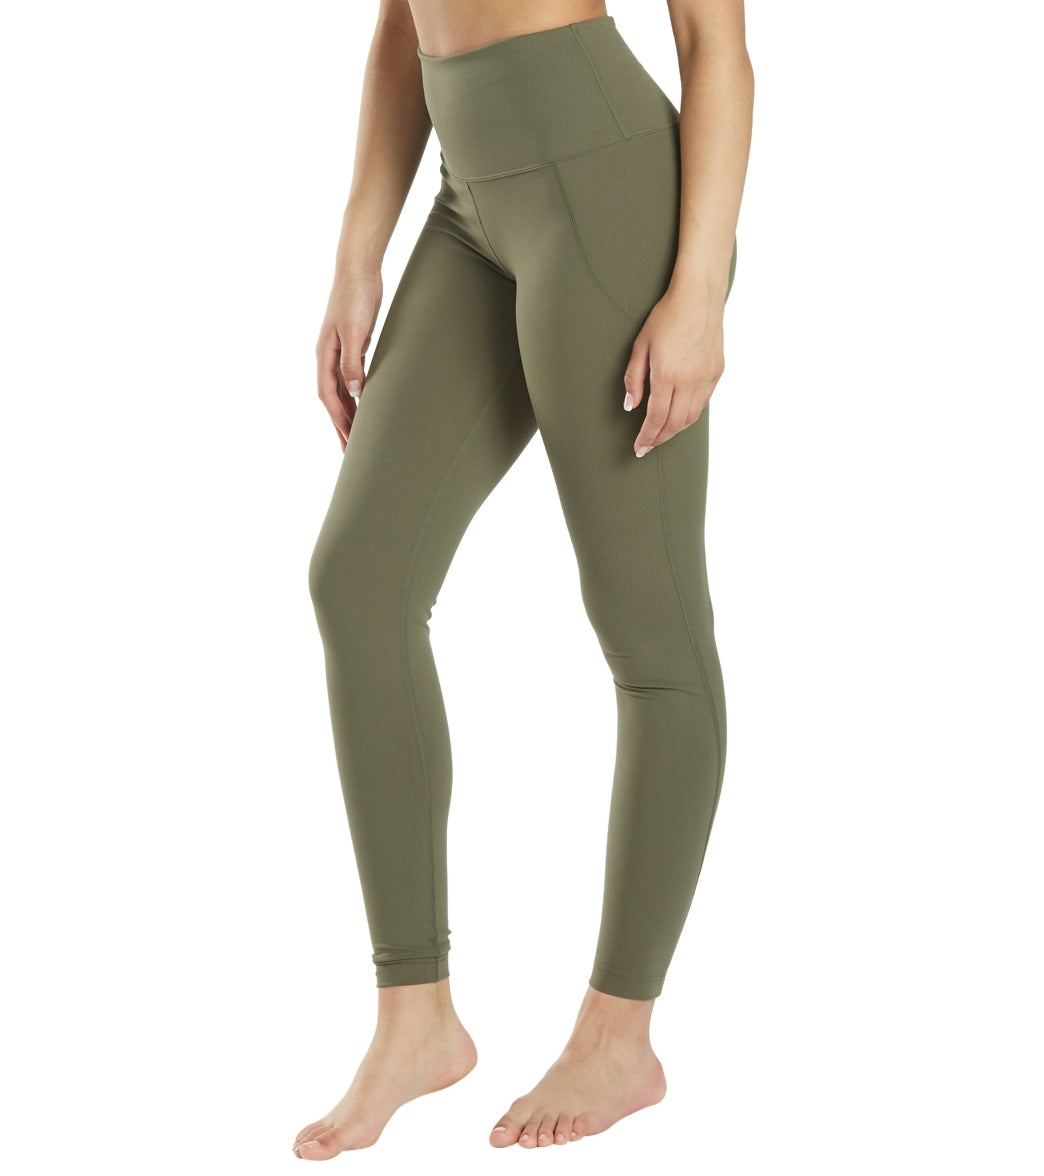 Electric Yoga Basic Short at YogaOutlet.com - Free Shipping –